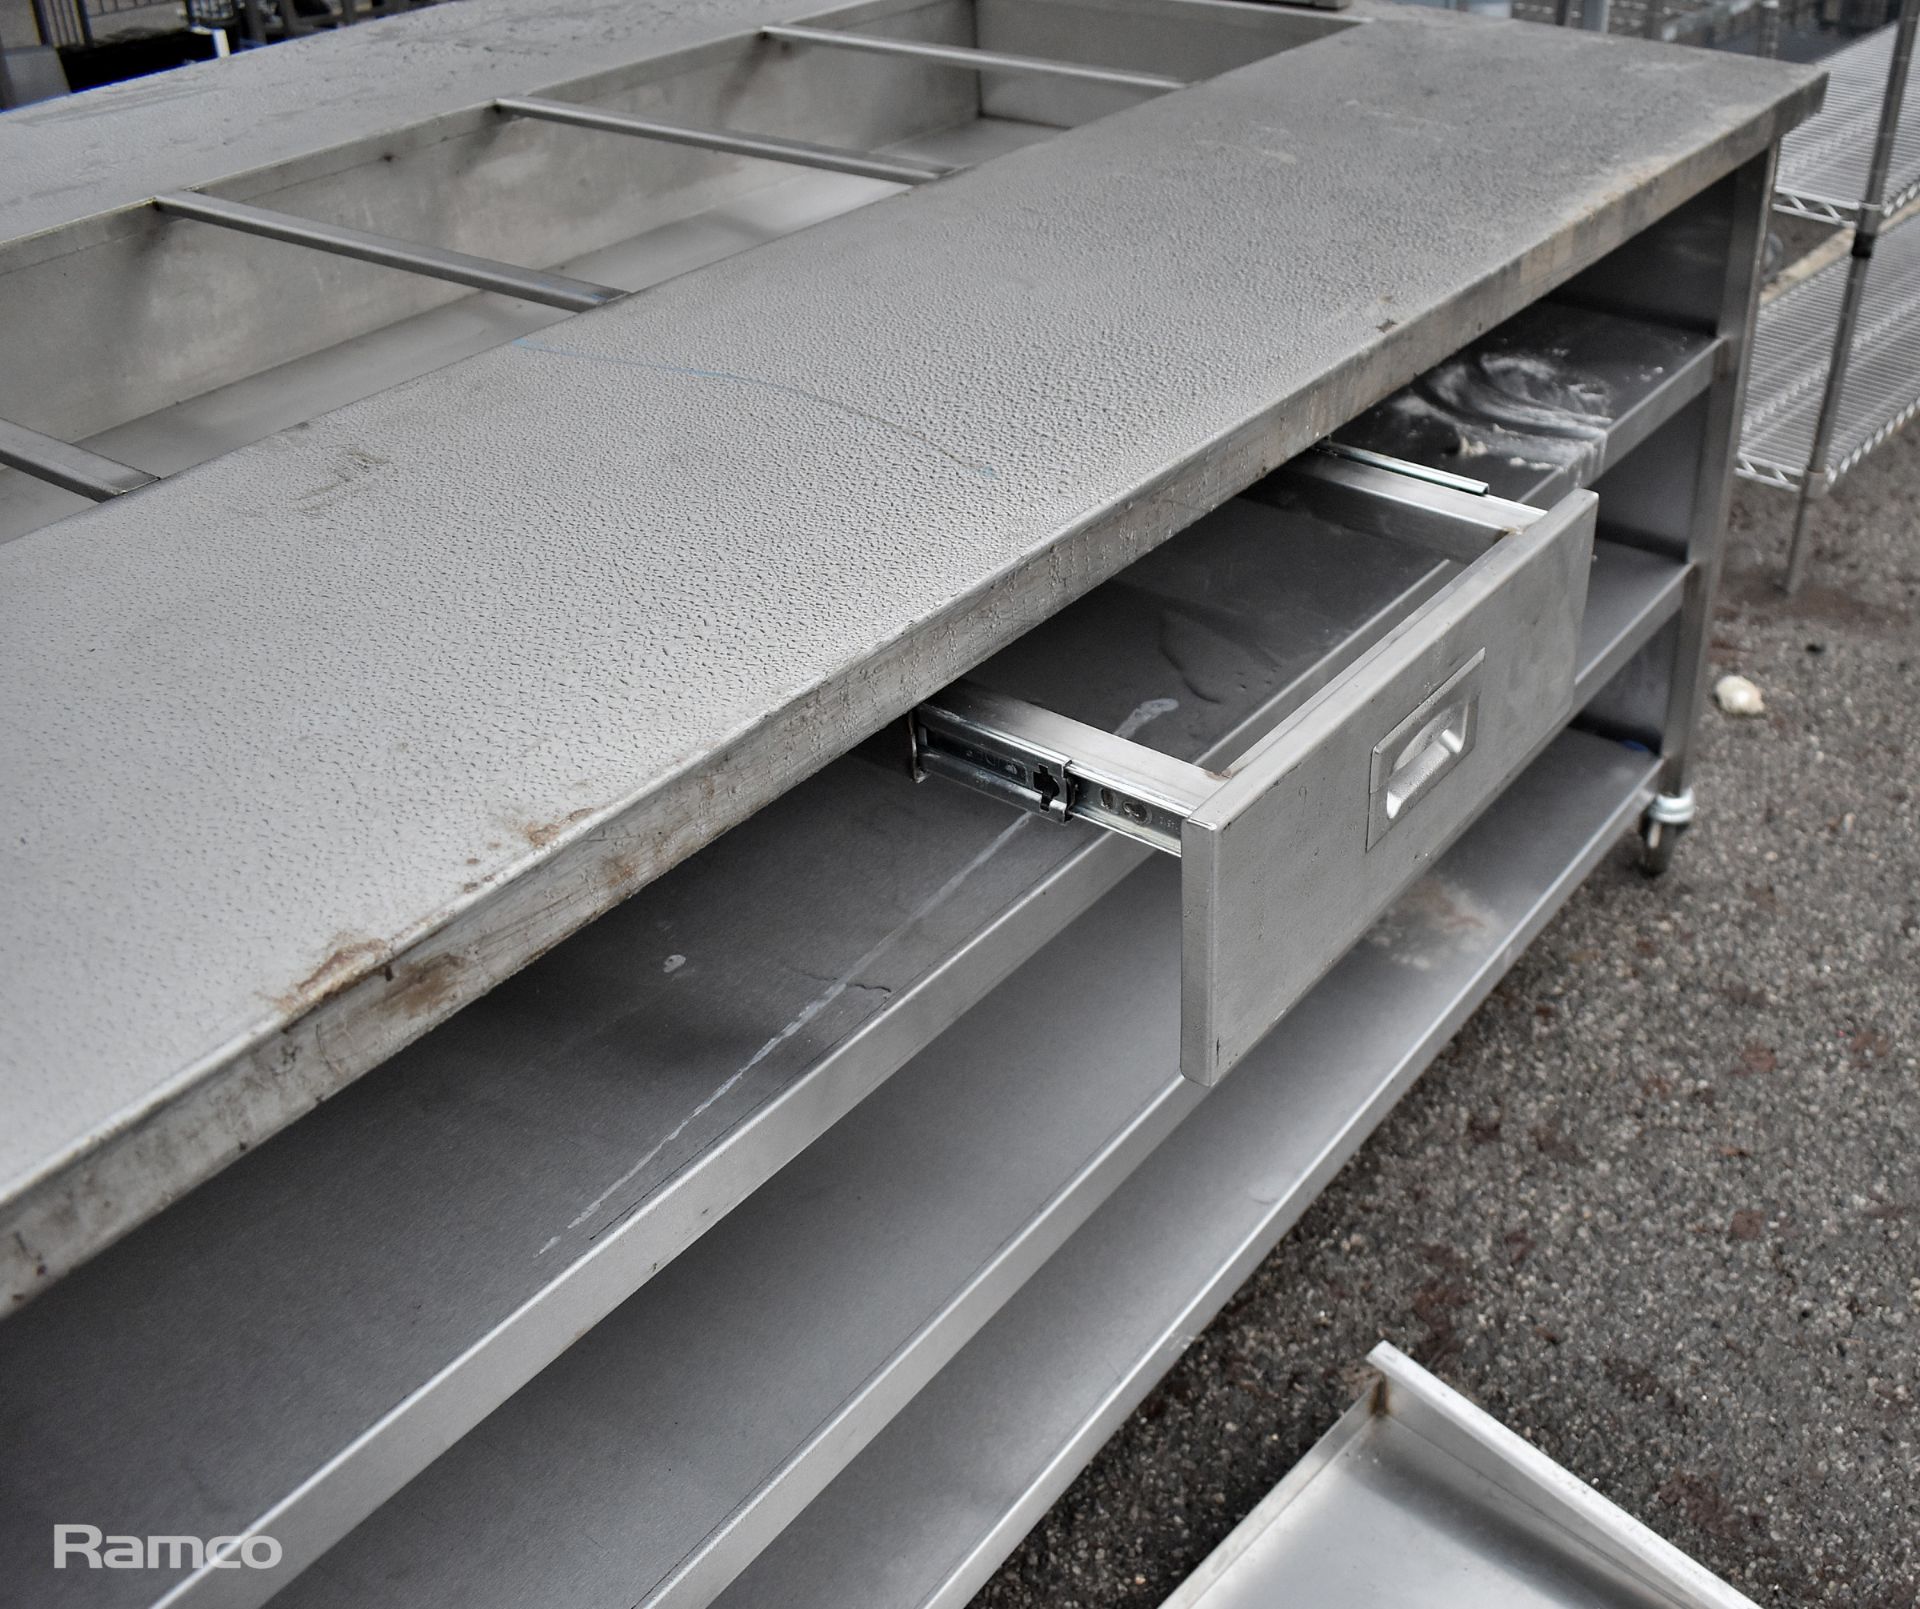 Stainless steel Prep station/Service station - L210 x W140 x H200 approximately - Image 3 of 7